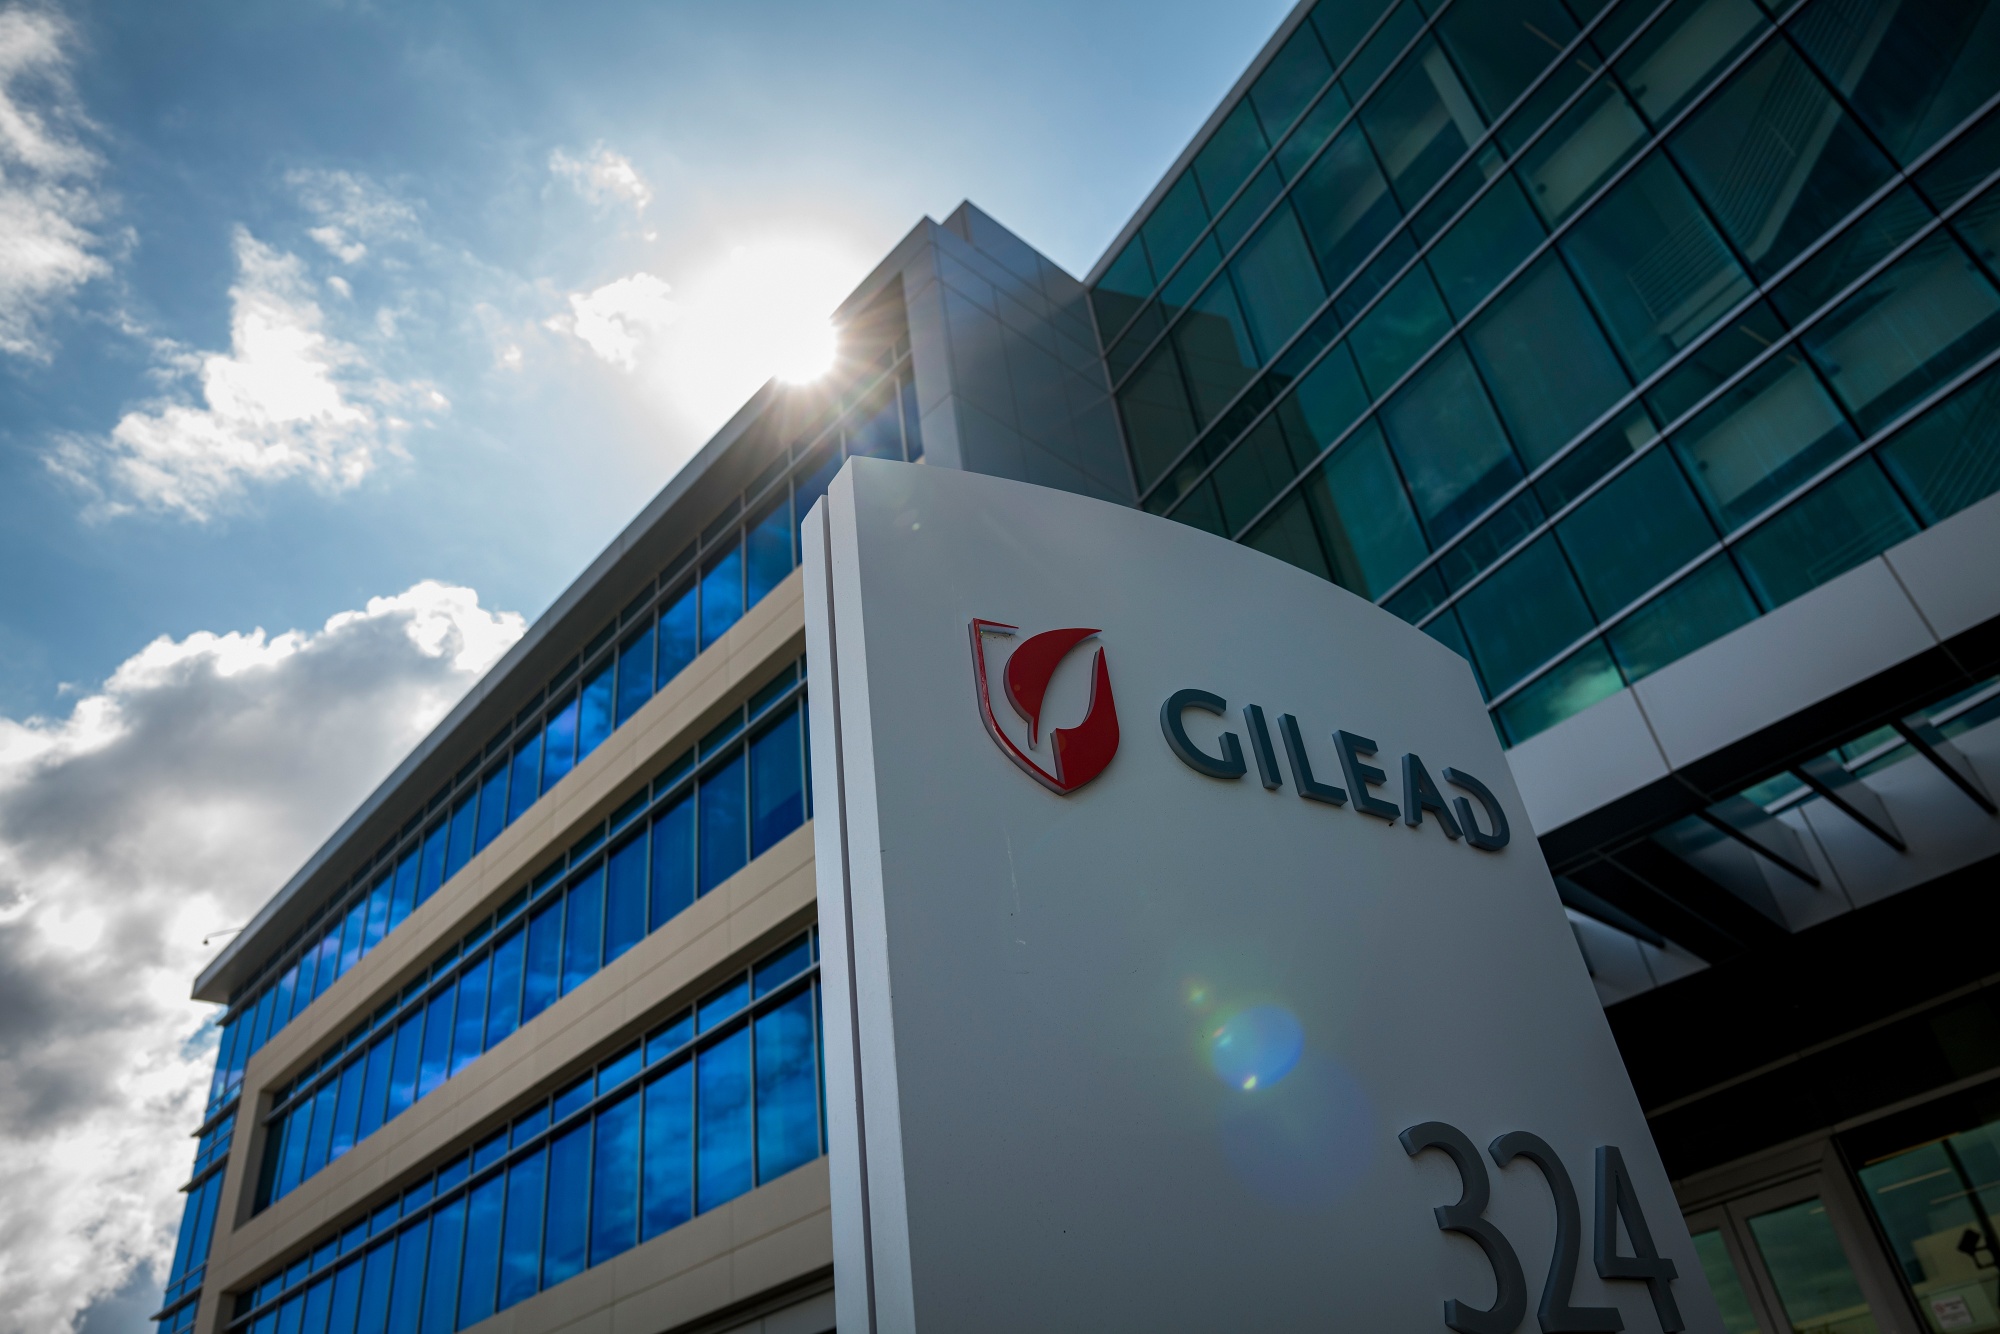 Signage is displayed outside Gilead Sciences Inc. headquarters in in Foster City, California, U.S.